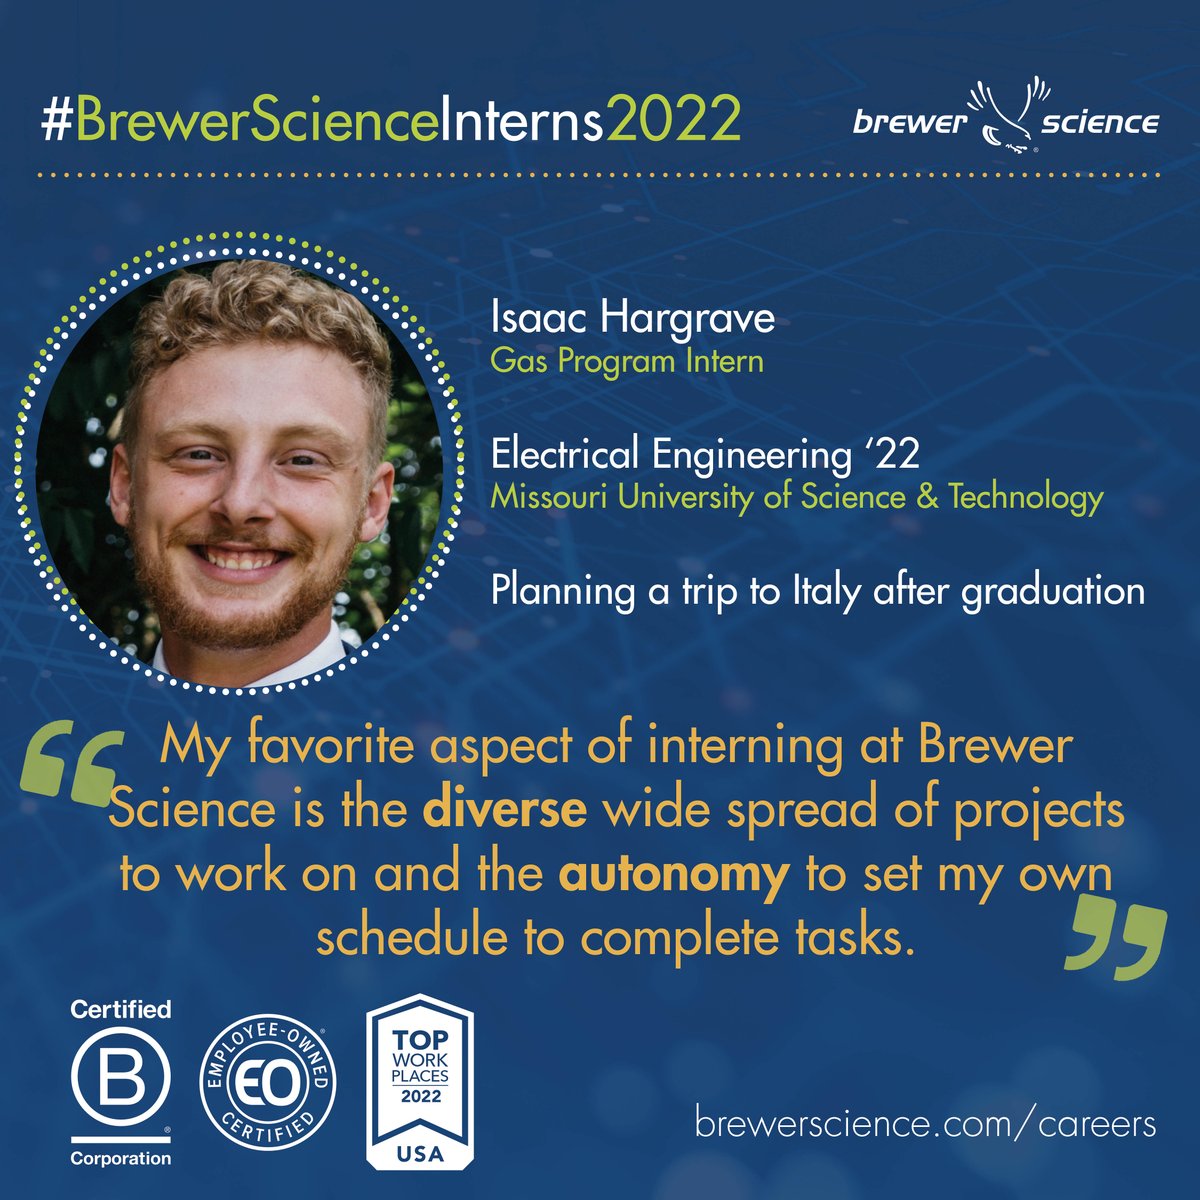 test Twitter Media - Isaac Hargrave is a Gas Program Intern currently studying Electrical Engineering at .@MissouriSandT. Learn more about internships & career opportunities at Brewer Science: https://t.co/BJYT6e1KsZ https://t.co/dWUTttY4UT